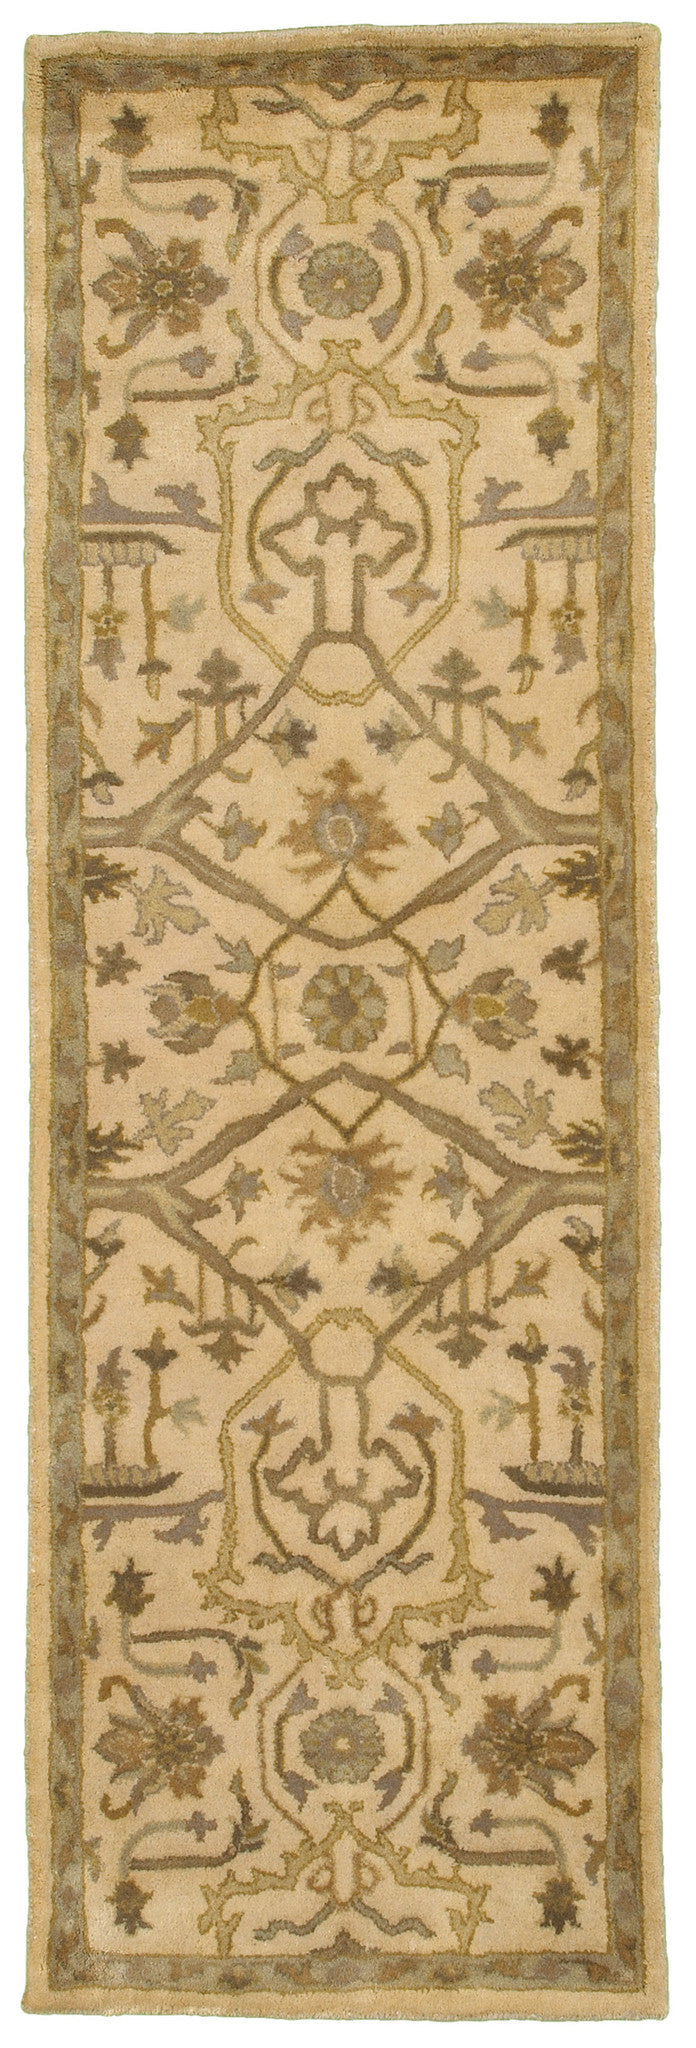 LR Resources Majestic 09305 Beige Hand Tufted Area Rug 2'5'' X 7'9'' Runner